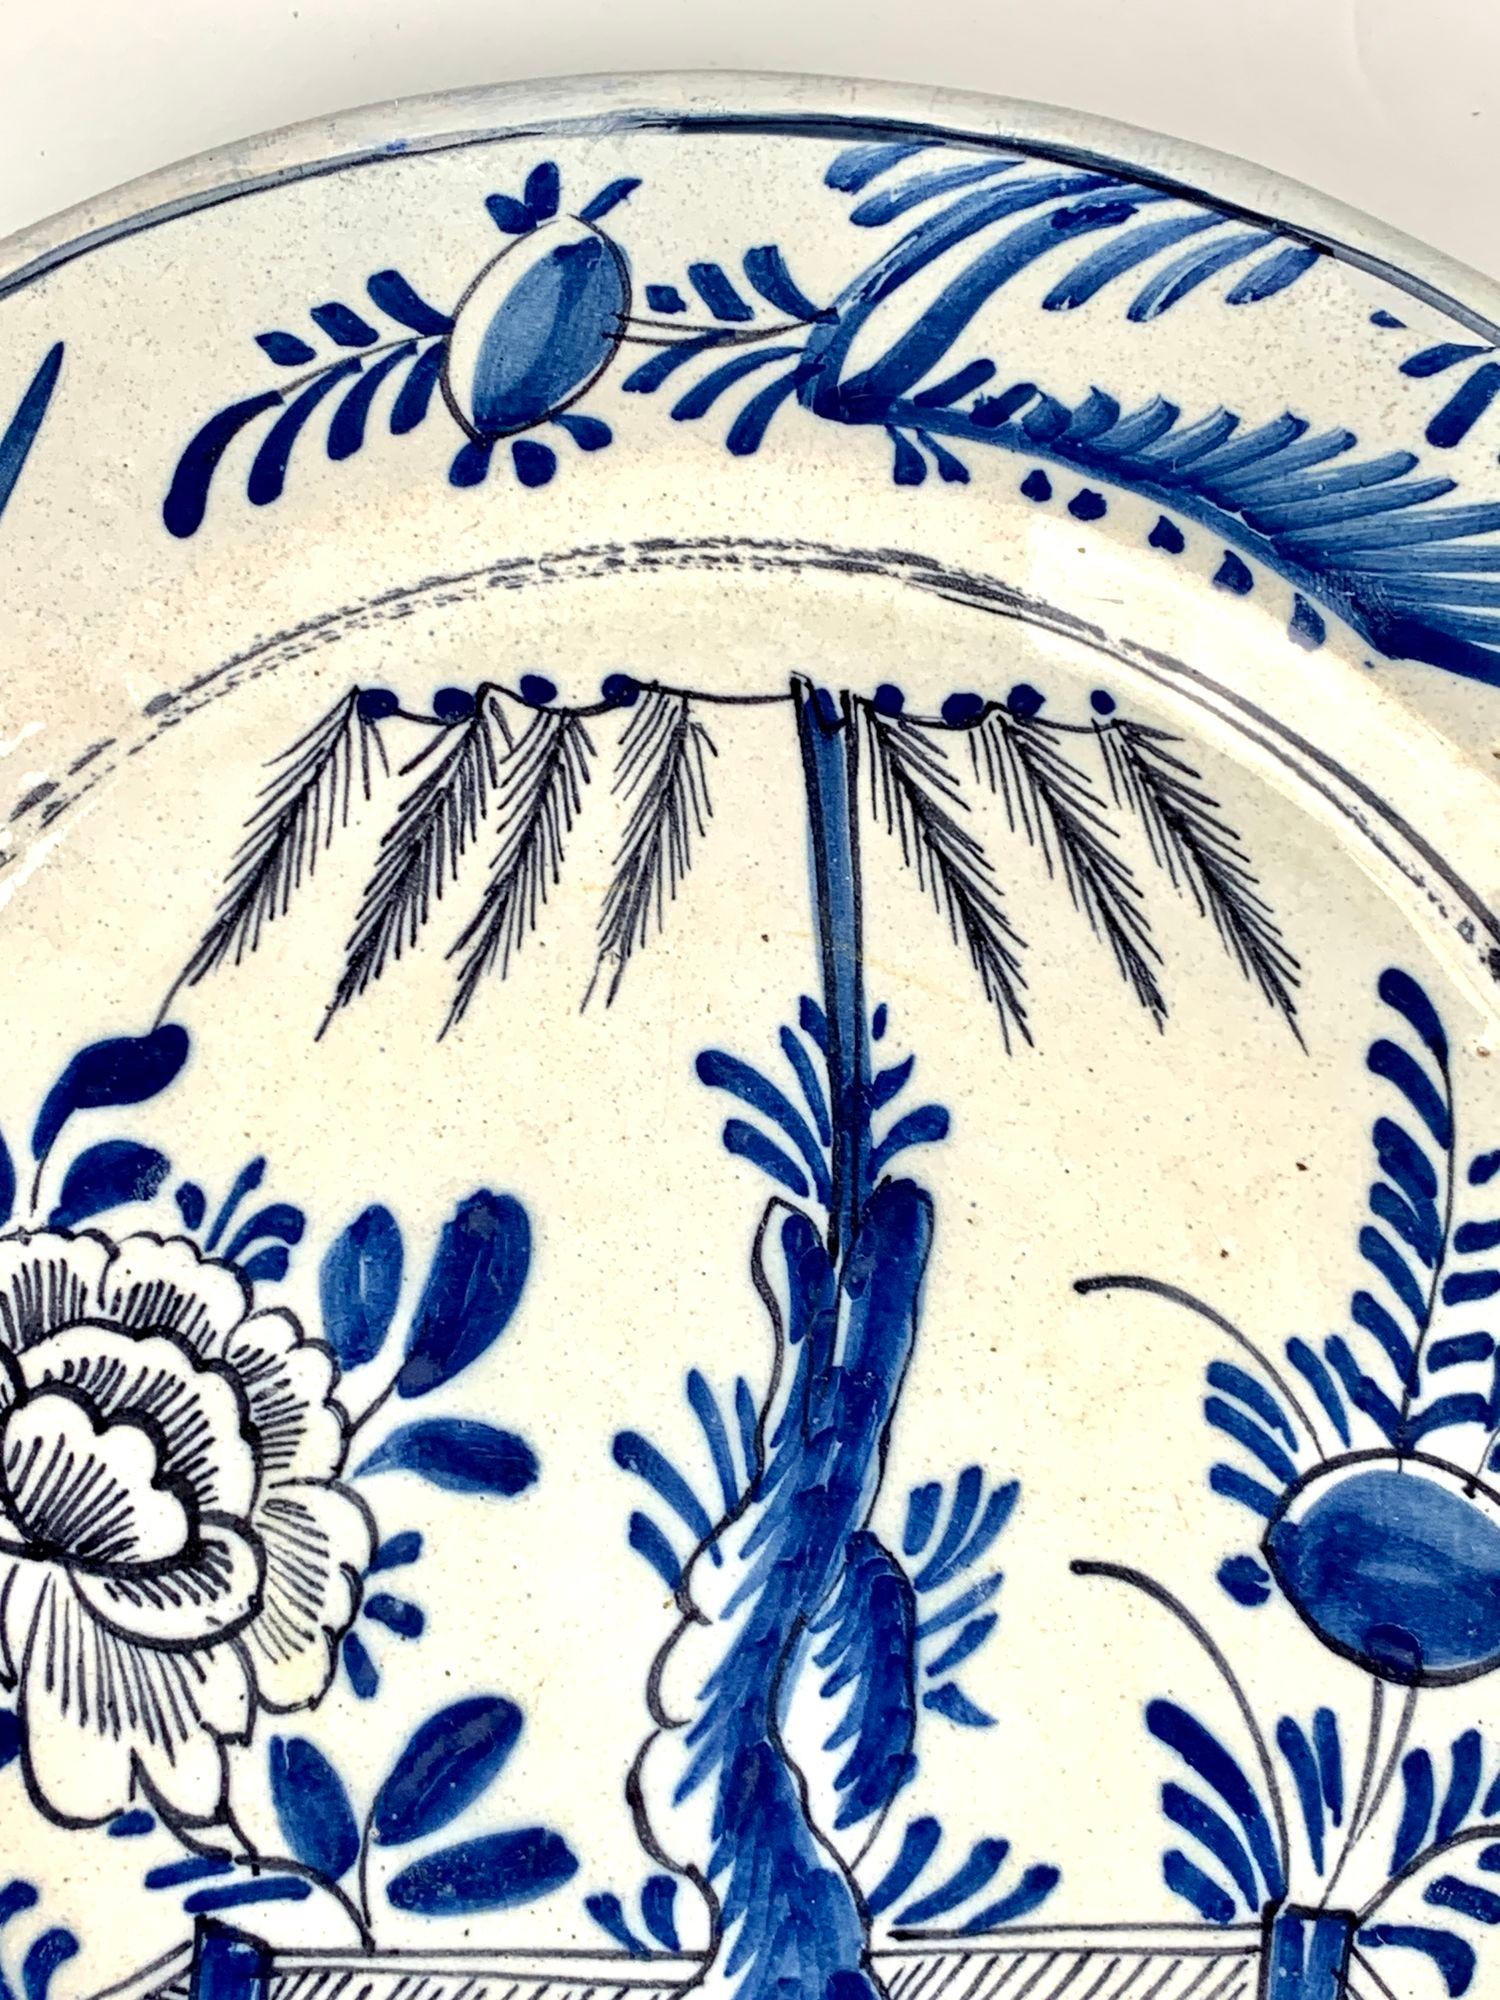 Hand painted circa 1780, this eye-catching blue and white Delft charger is hand painted in shades of cobalt blue with black accents.                              
The artist has captured a vibrant garden scene transporting the viewer to a world of